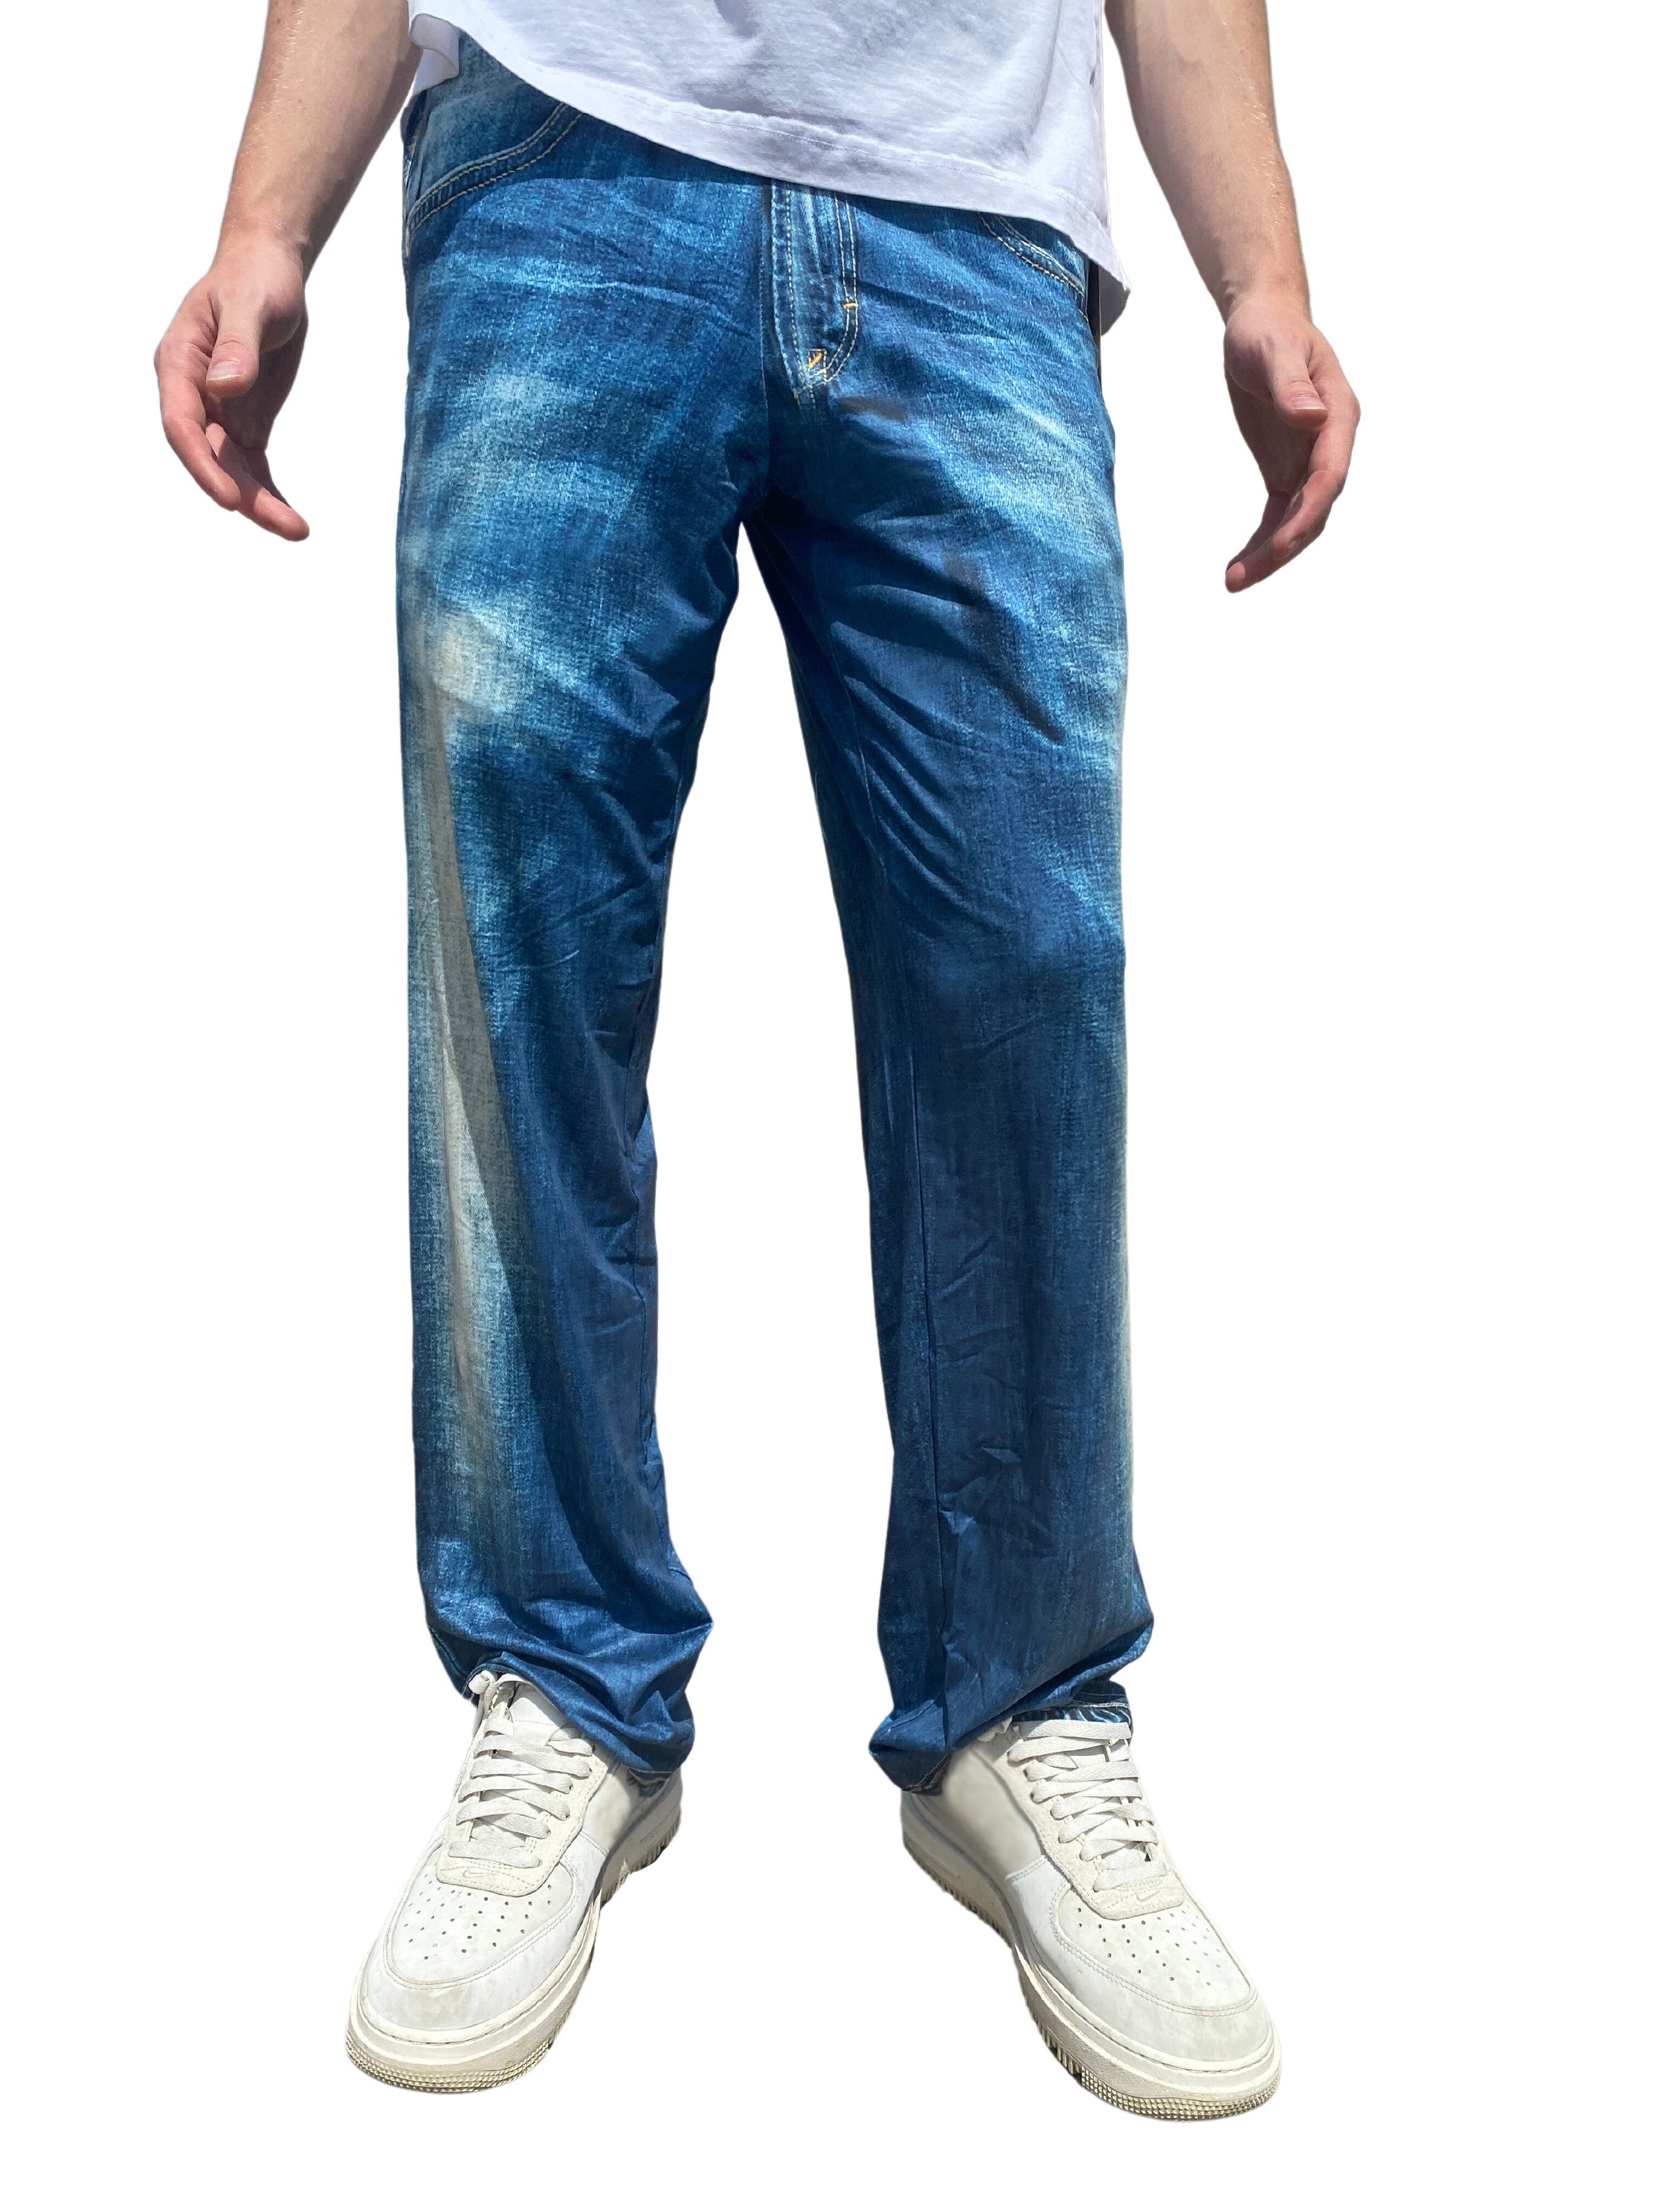 Blue Jeans Pajama Lounge Pants front view on model (waist down)